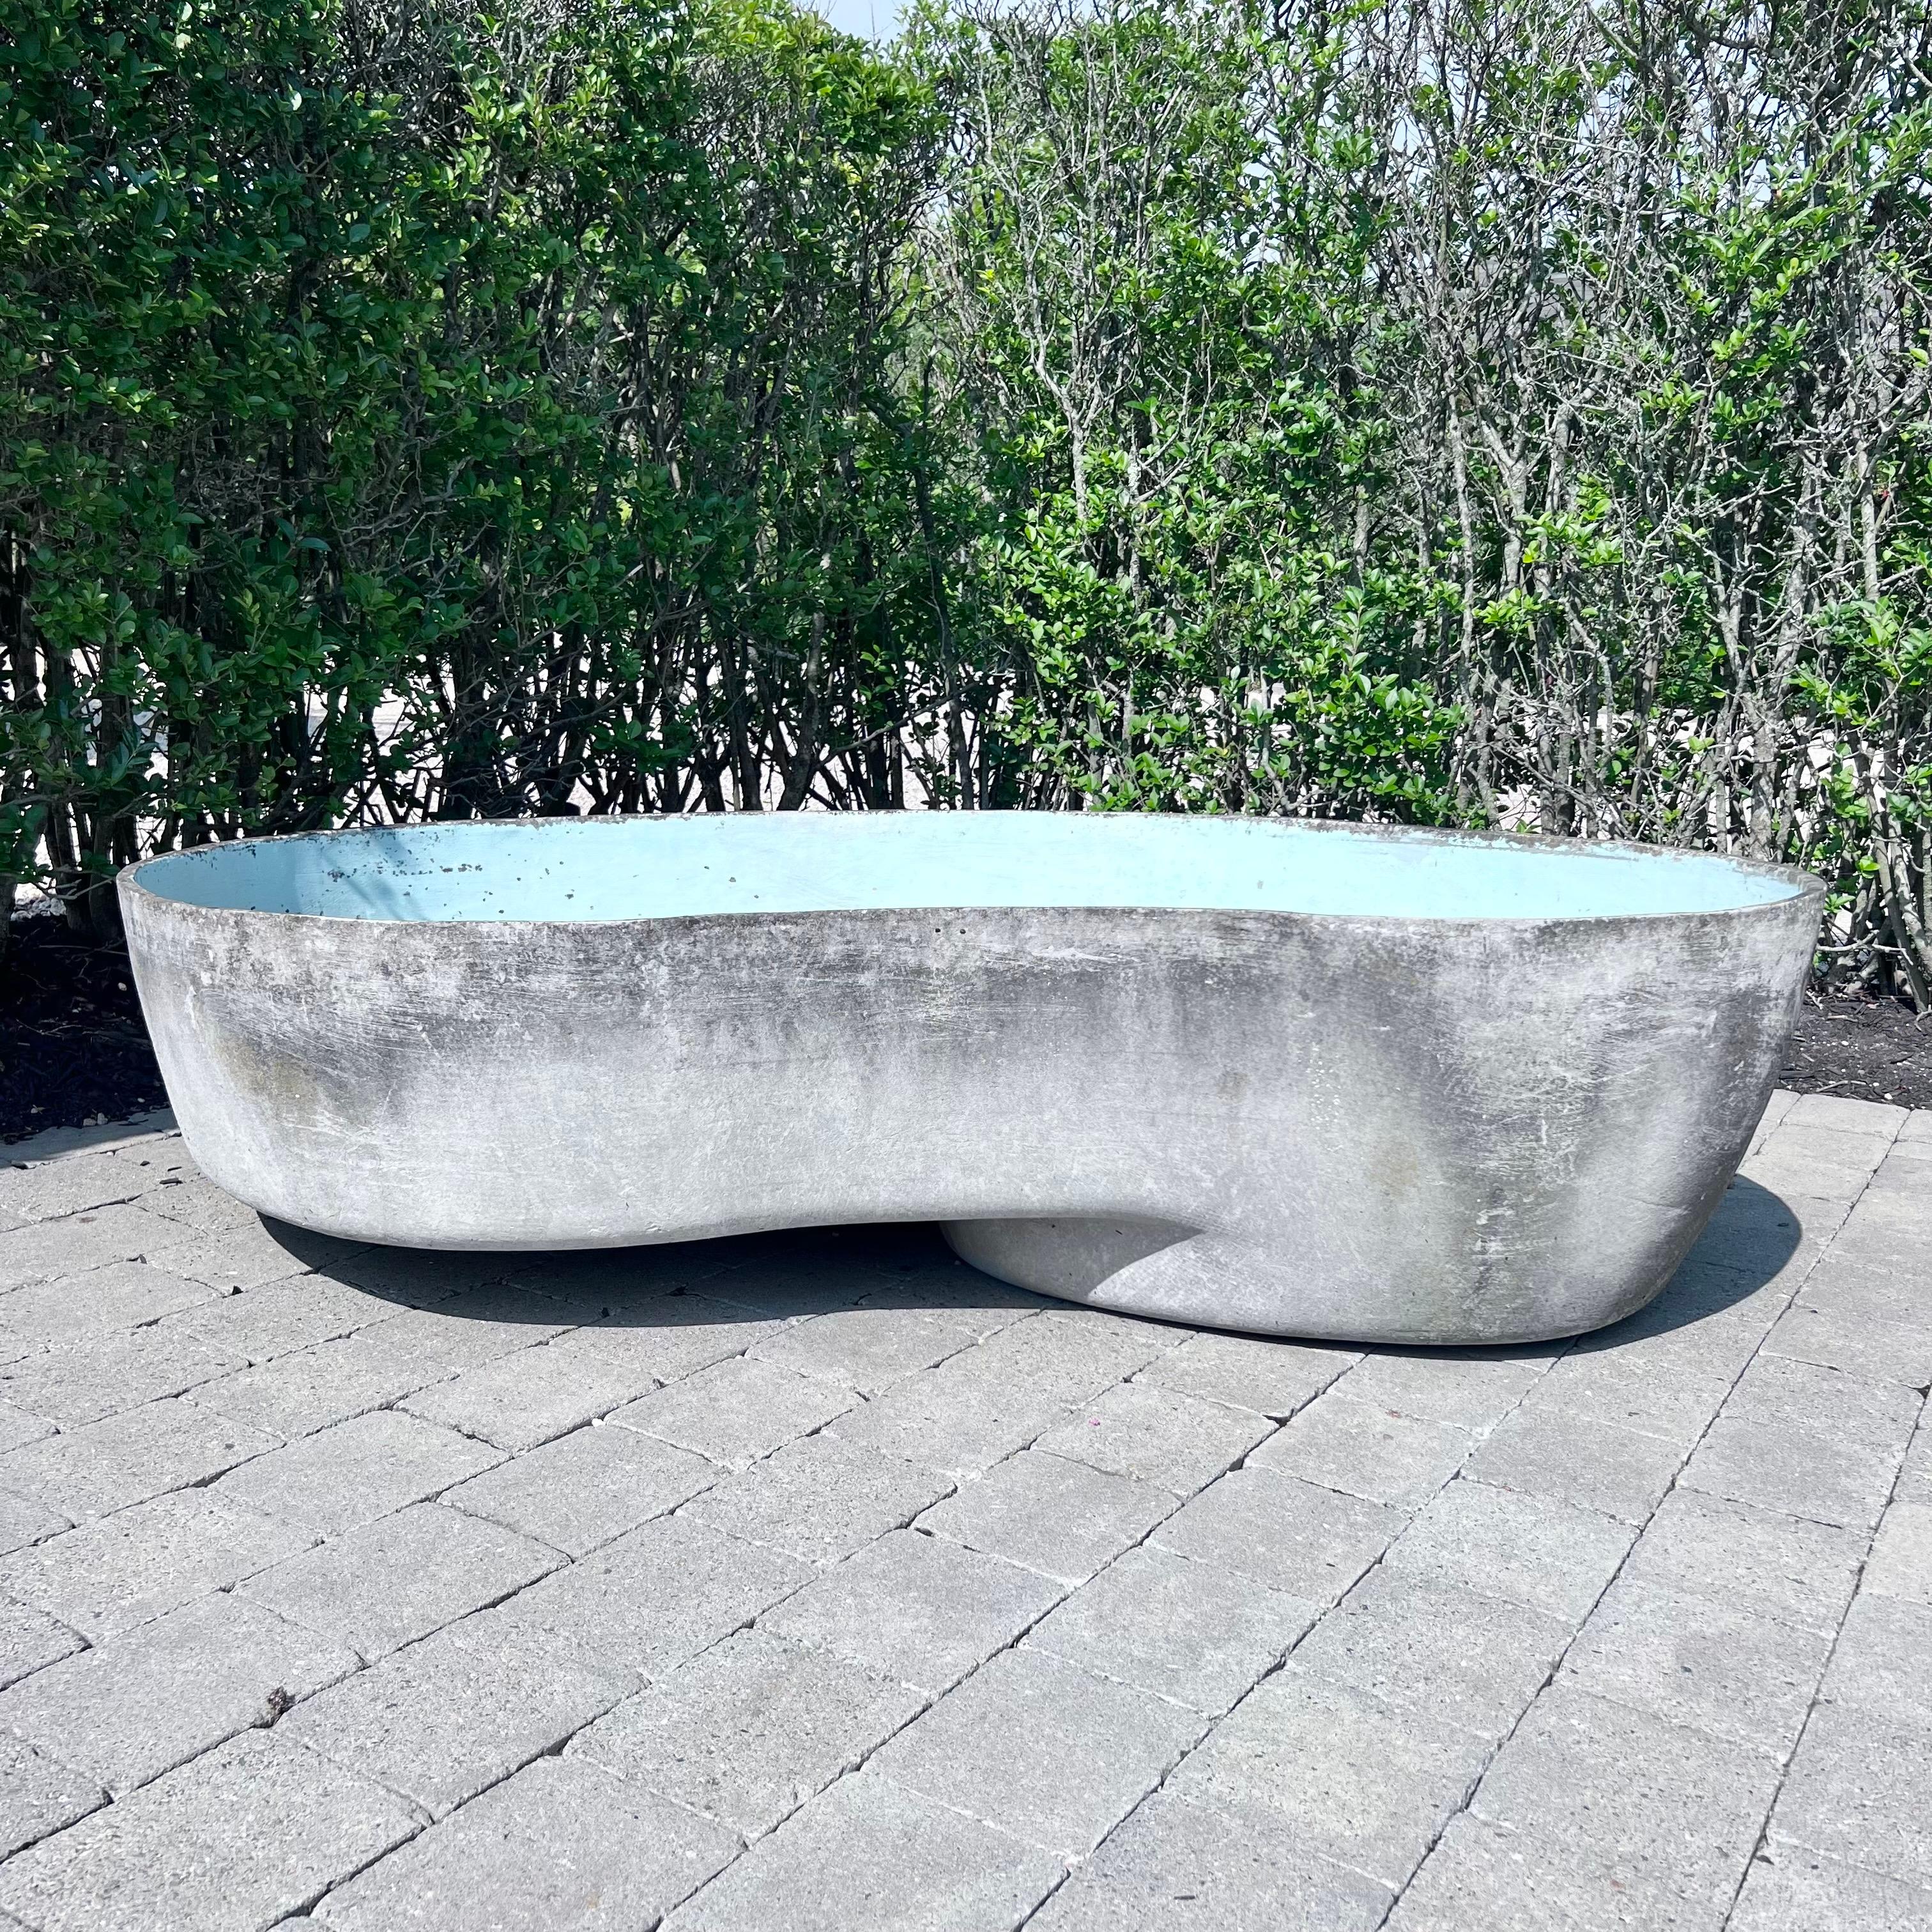 Incredibly rare biomorphic pond designed by Swiss Neo-functionalist and Industrial design pioneer Willy Guhl for Eternit in Switzerland, circa 1960s. Sculpted from Guhl’s typical fiber cement which has slowly weathered and patinaed through the